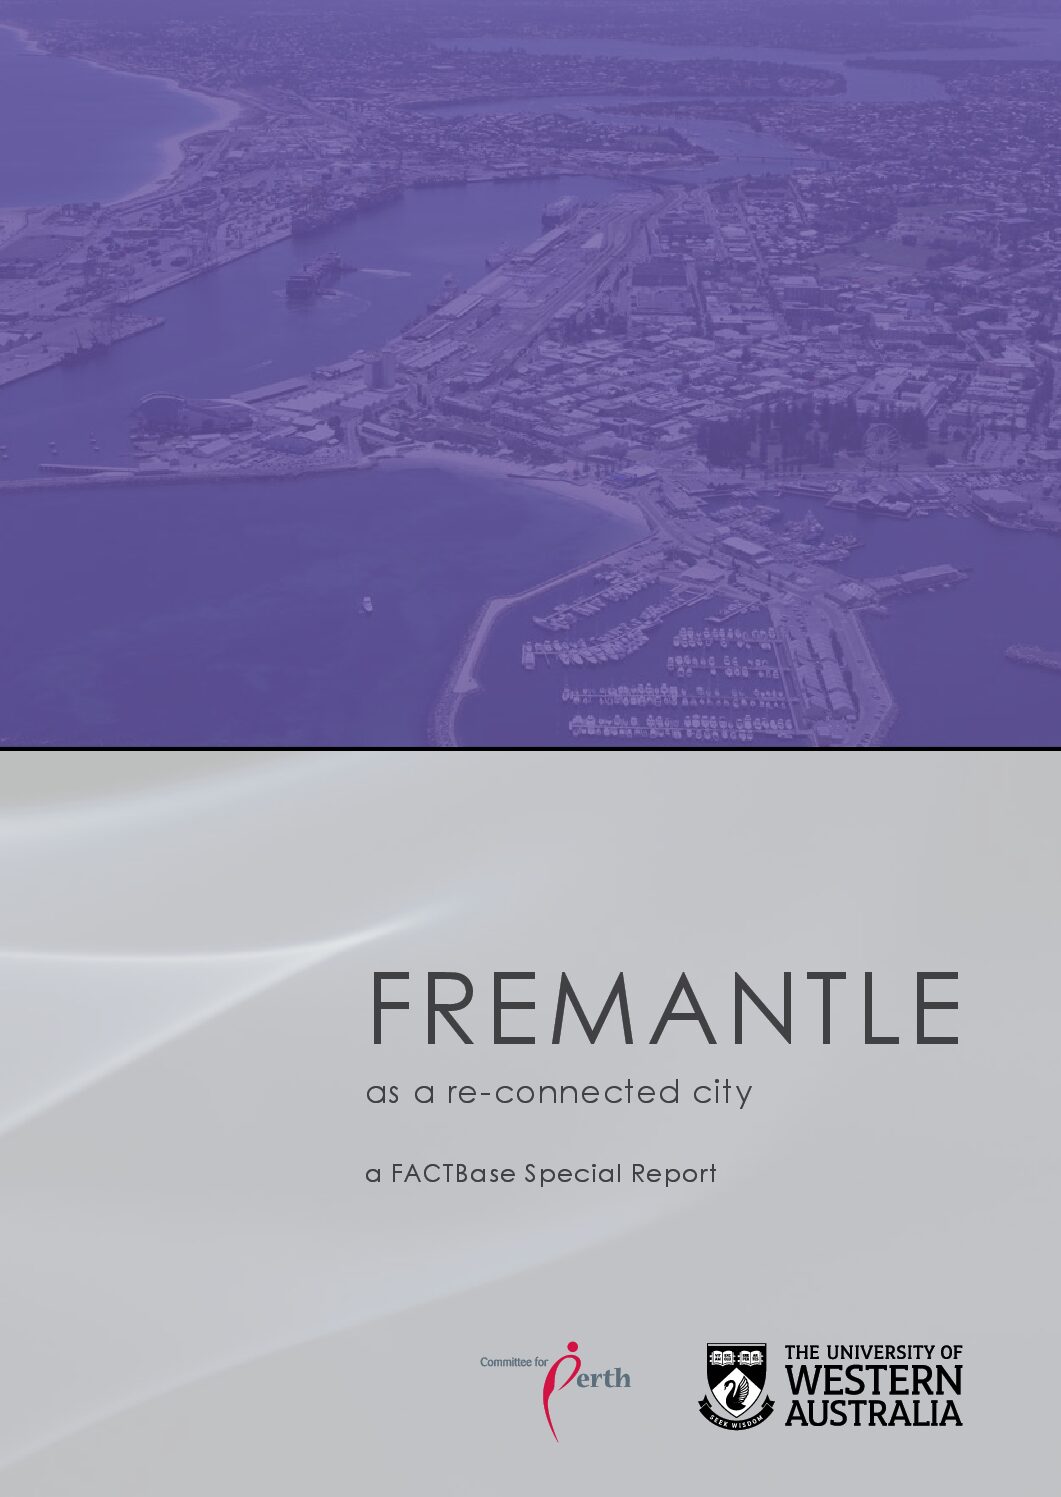 FACTBase Special Report - Fremantle as a re-connected city - December 2015